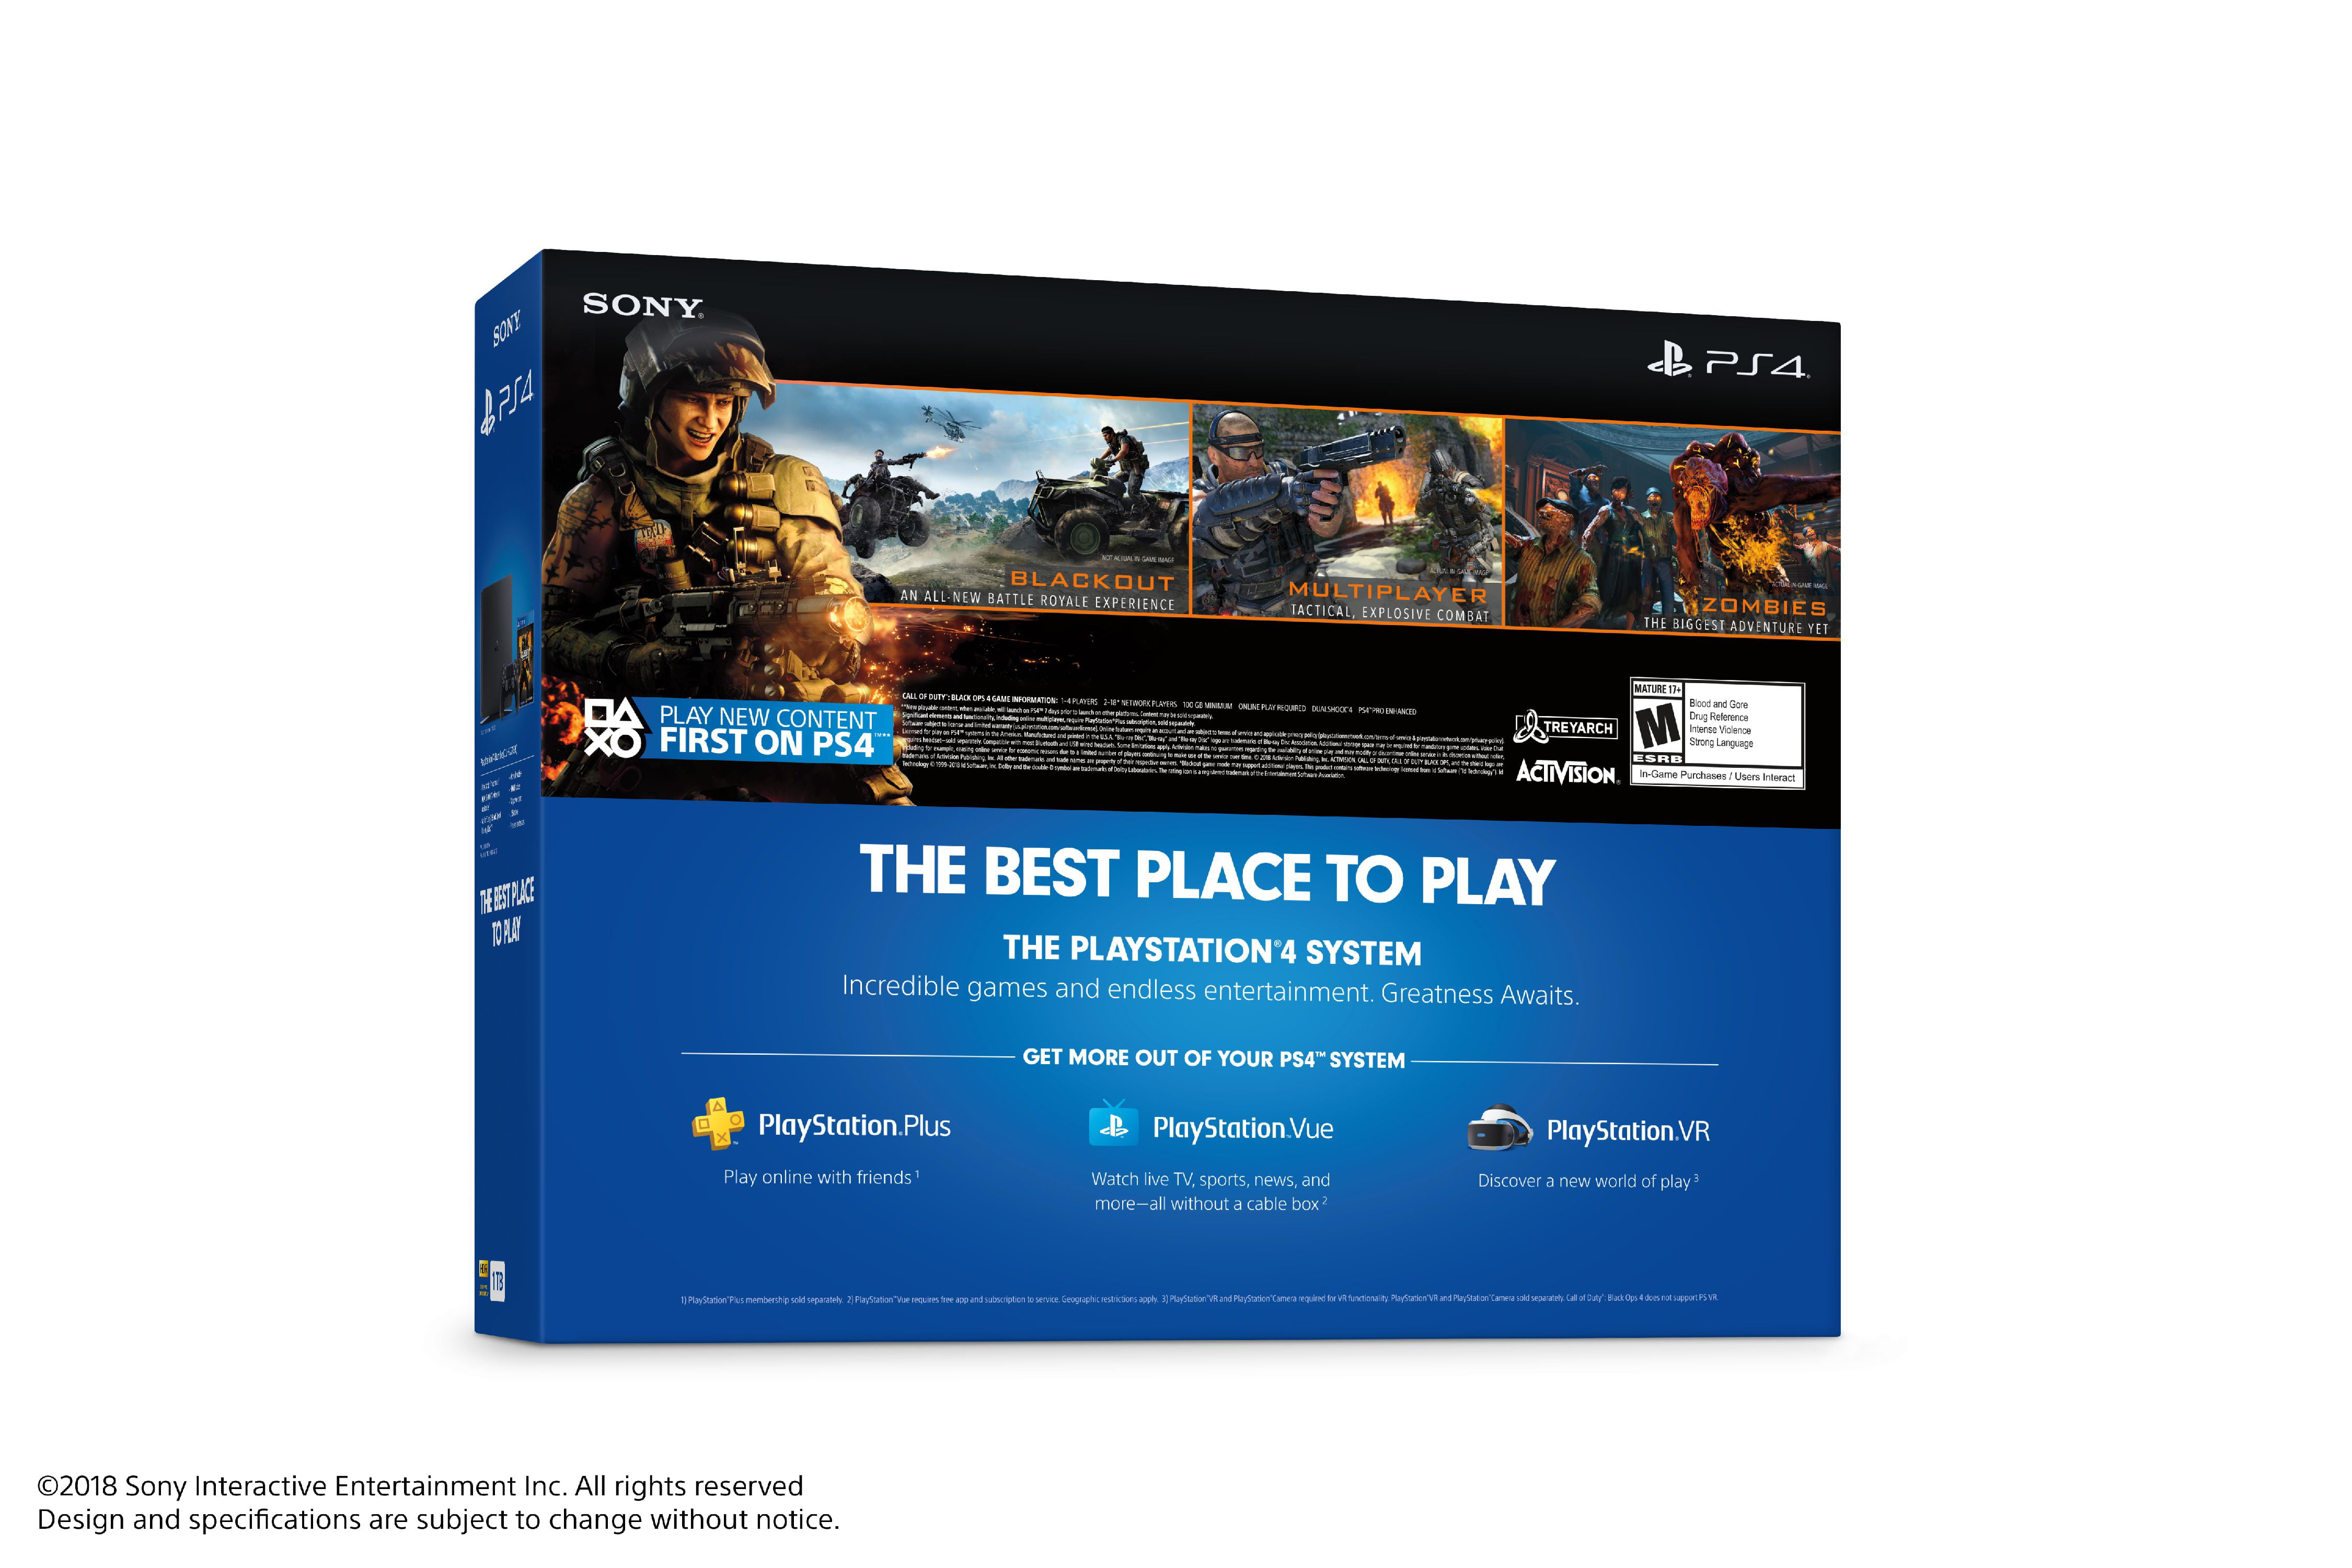 Call of Duty: Black Ops 4 - Sony PlayStation 4 for sale online